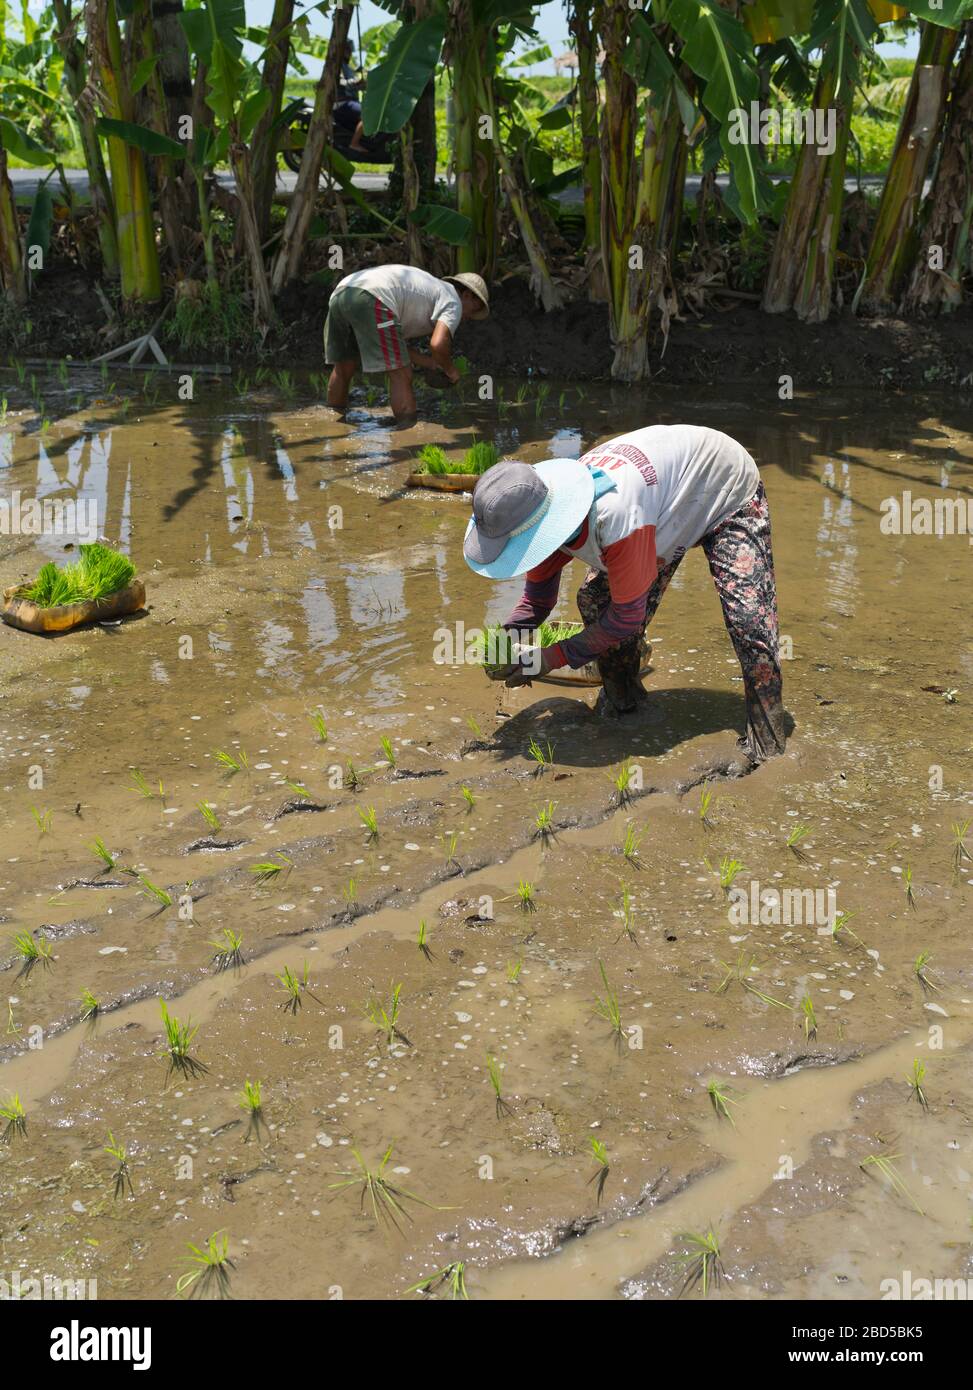 dh Local Balinese people BALI INDONESIA Planting rice in paddy field asia woman indonesian southeast asian farmworker labourer fields person worker Stock Photo